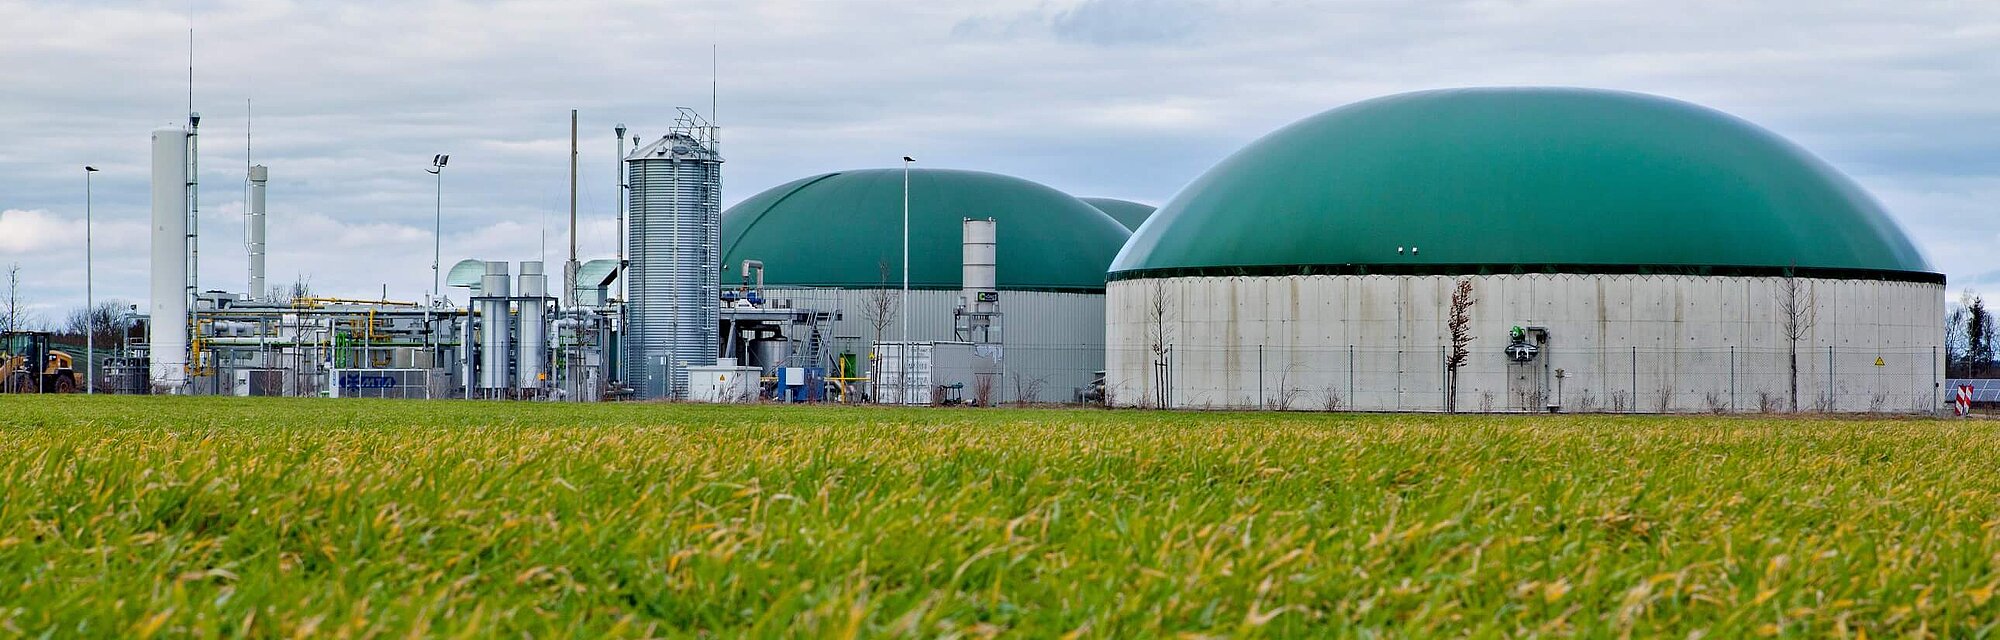 Protection of Biogas Systems, Wastewater Treatment and Landfill Gas Systems